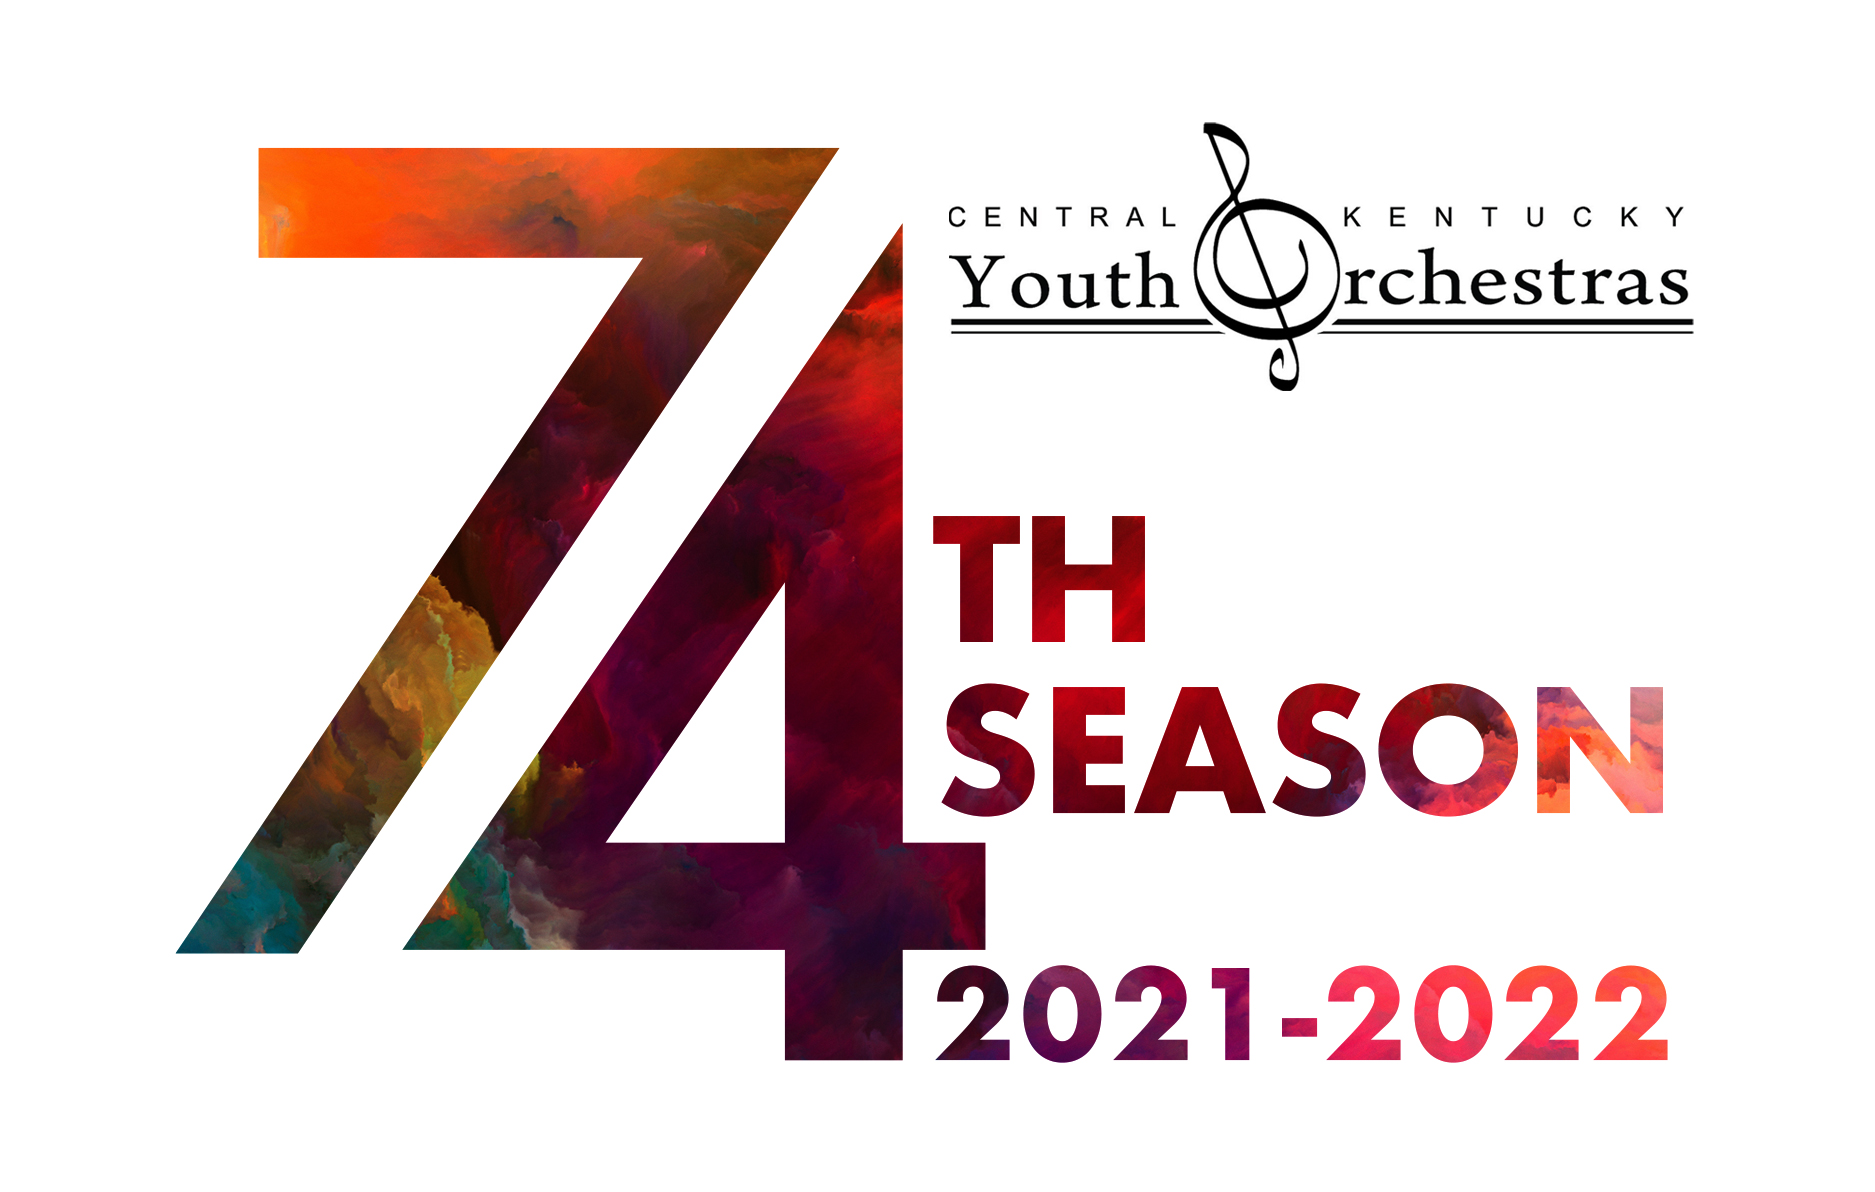 Central Kentucky Youth Orchestras